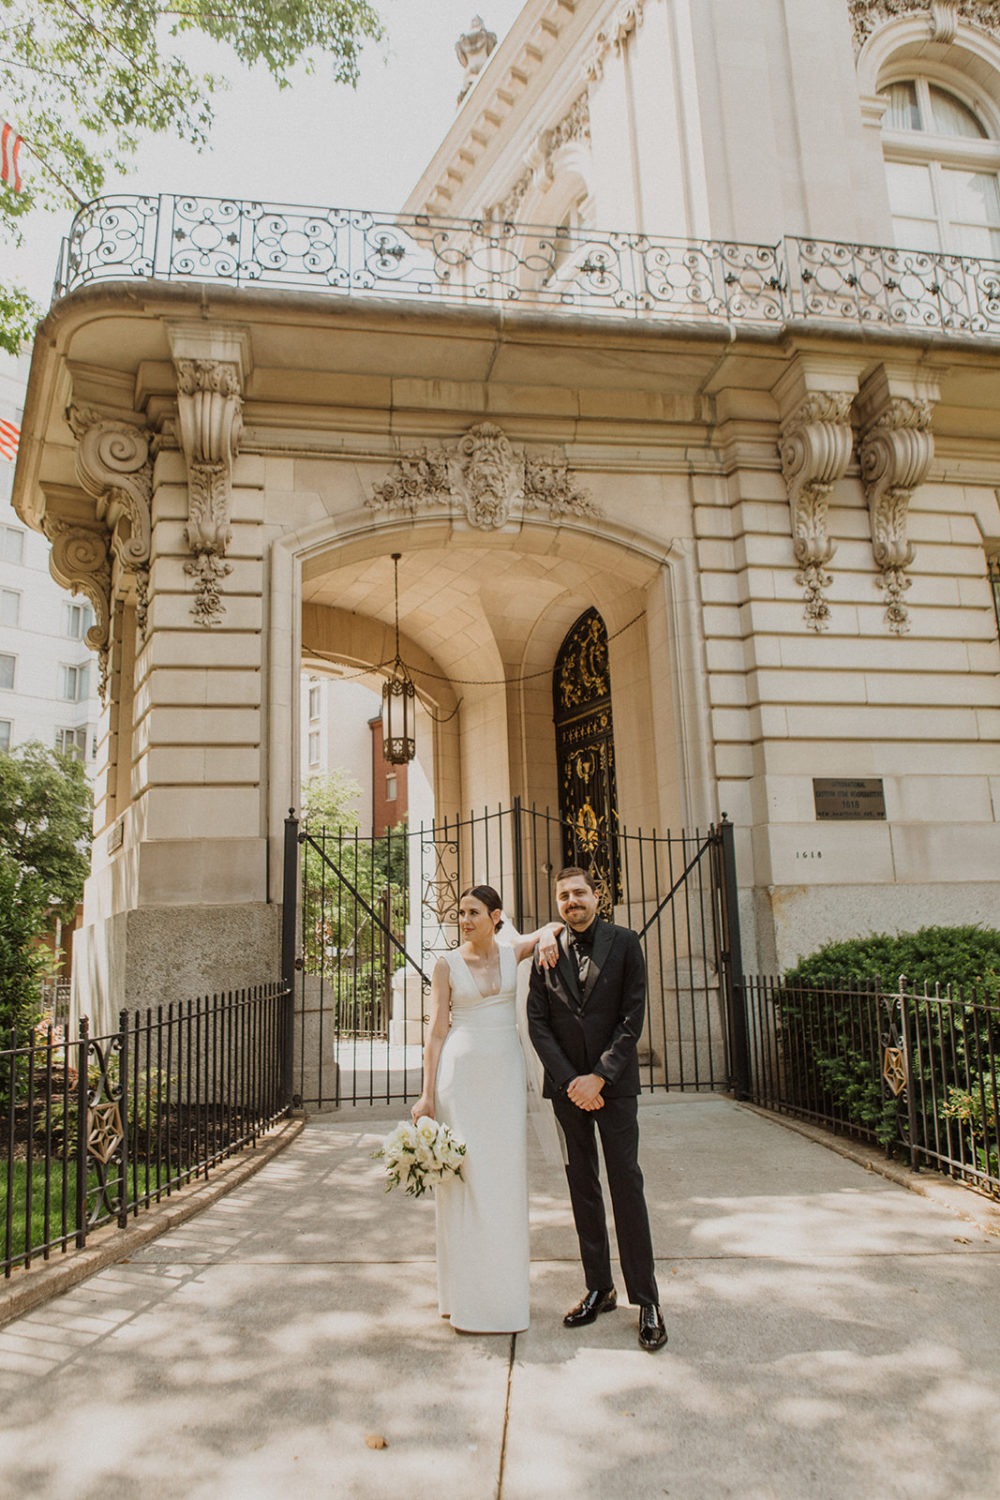 Couple stands outside gate of historic building in Dupont Circle